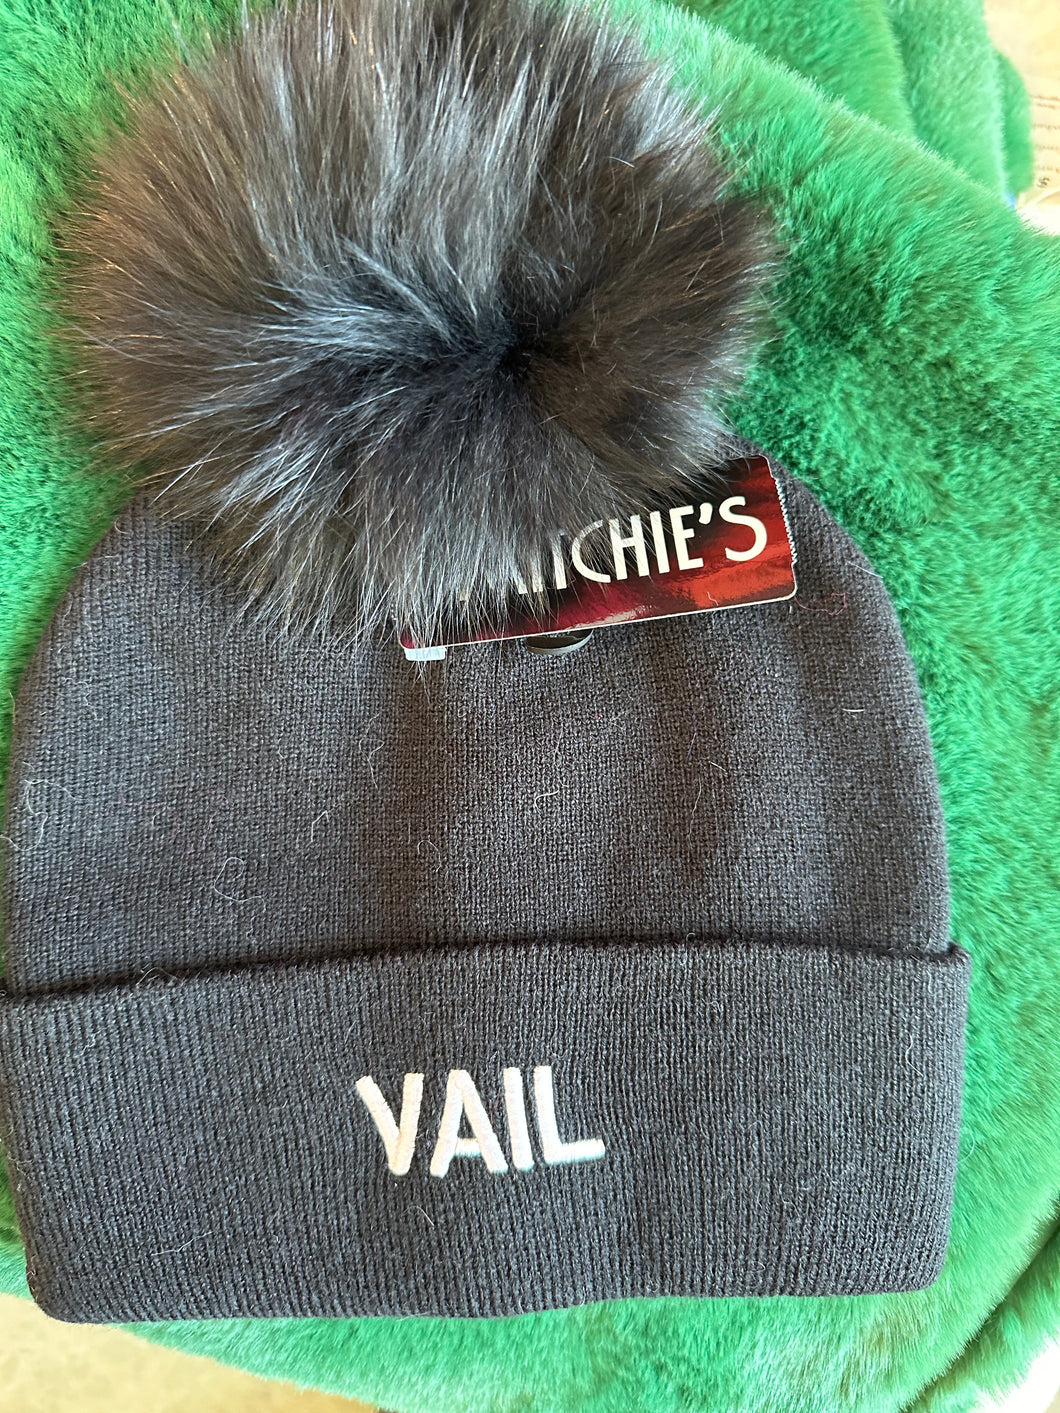 Mitchie’s Vail Embroidered Hat with Fur Pom